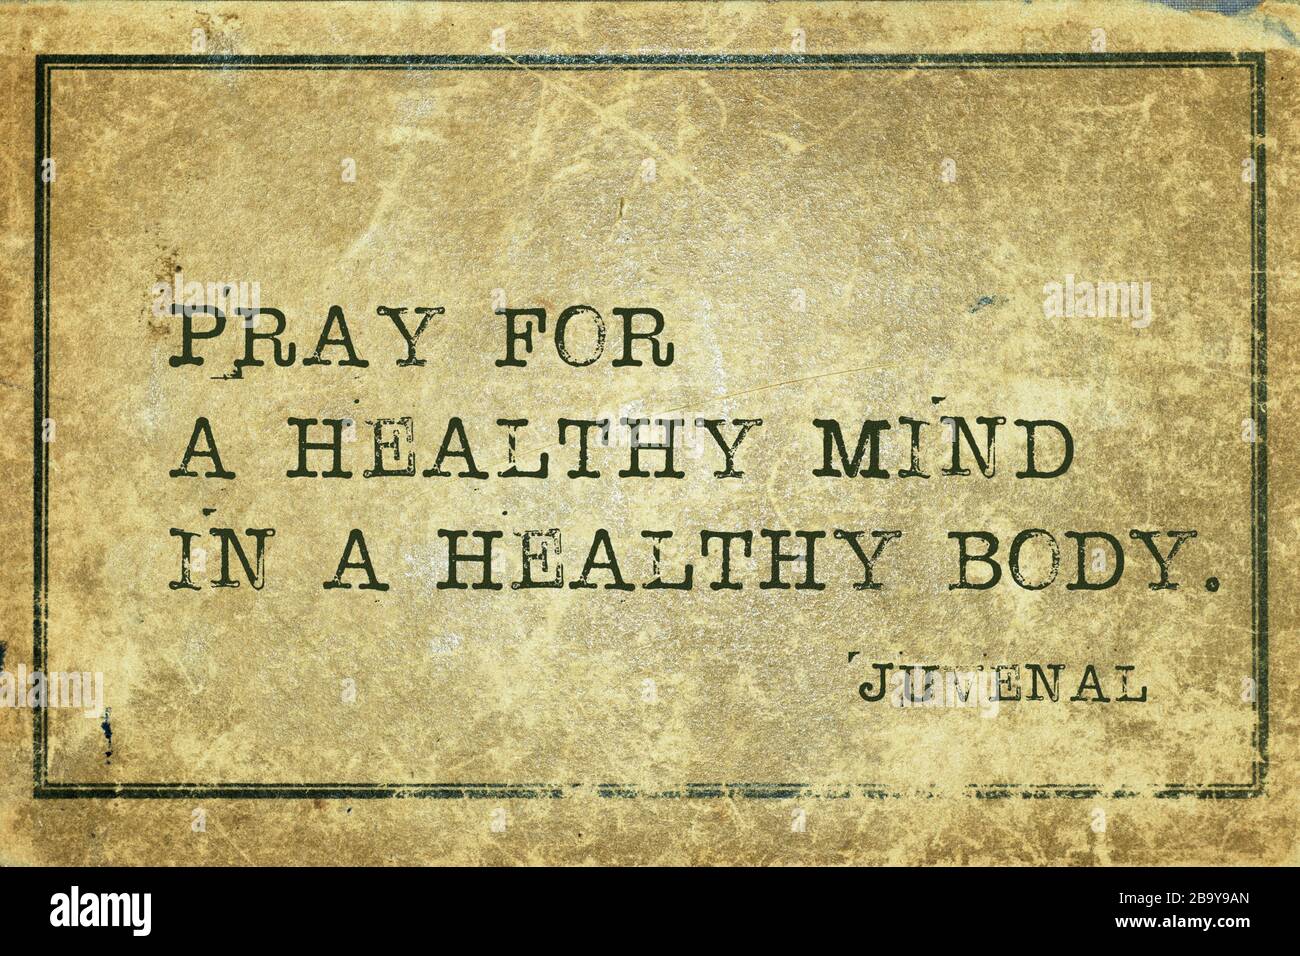 Pray for a healthy mind in a healthy body - ancient Roman poet Juvenal quote printed on grunge vintage cardboard Stock Photo